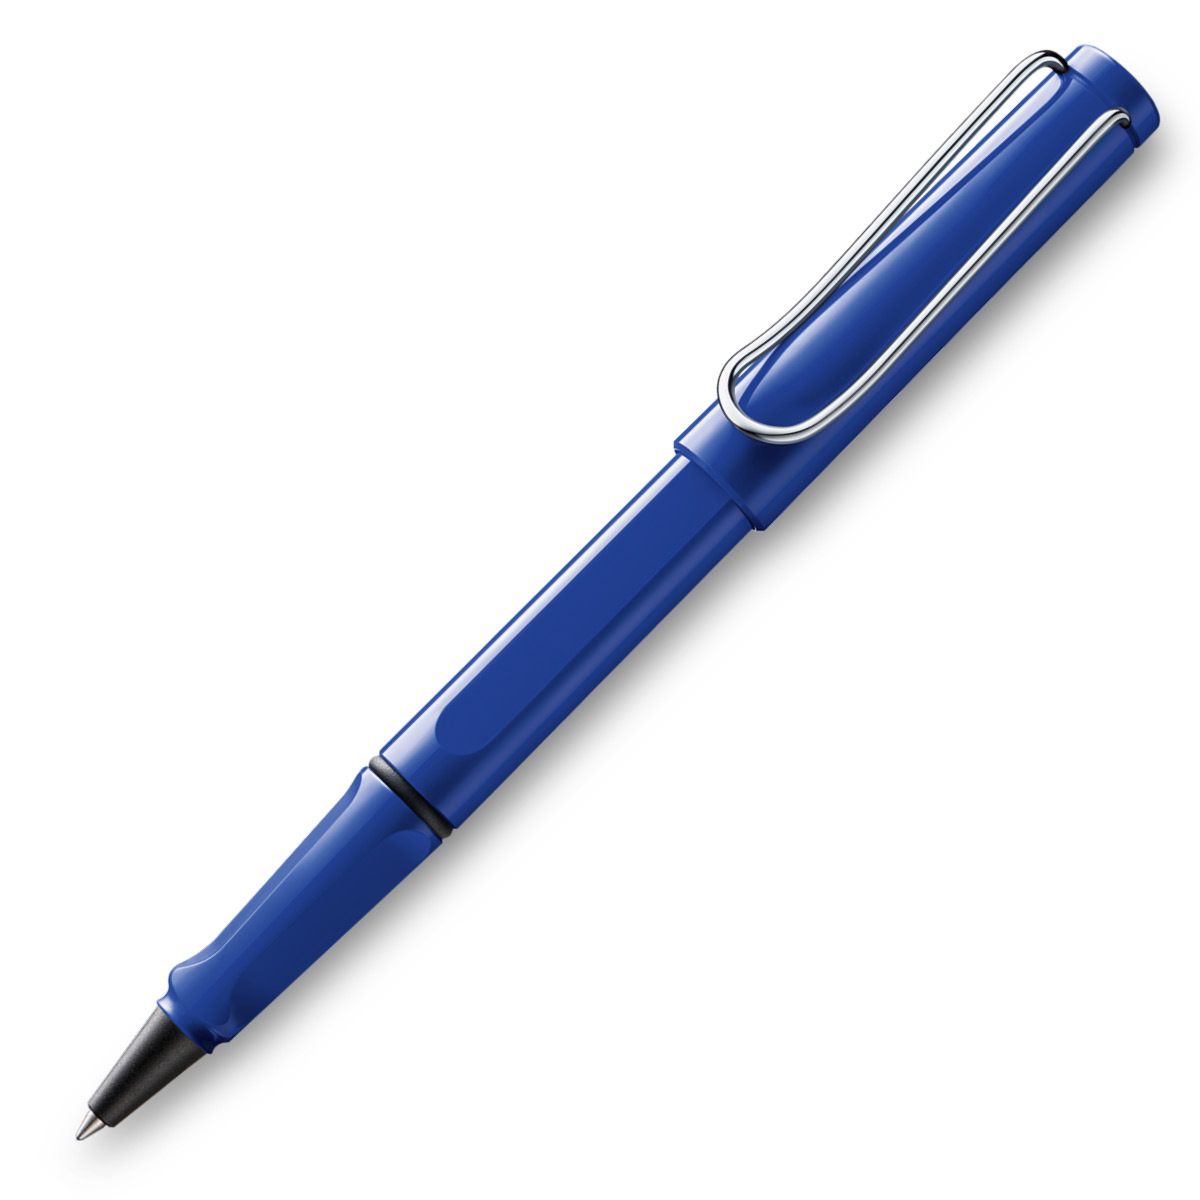 Safari Rollerball Shiny blue in the group Pens / Fine Writing / Gift Pens at Pen Store (101919)